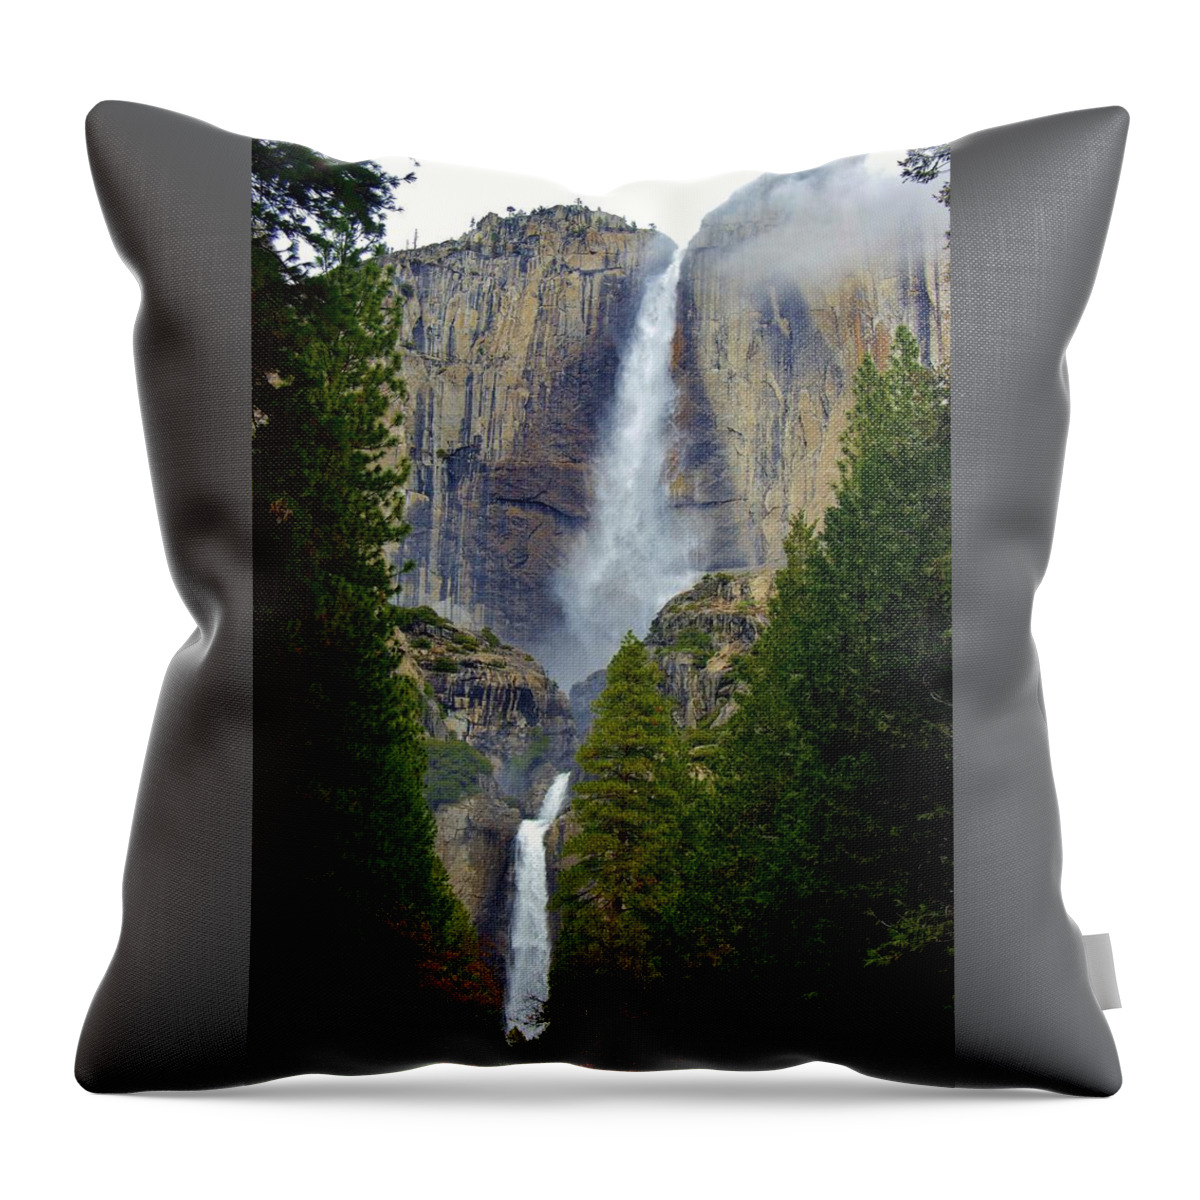 Yosemite Falls Throw Pillow featuring the photograph Yosemite Falls D by Phyllis Spoor